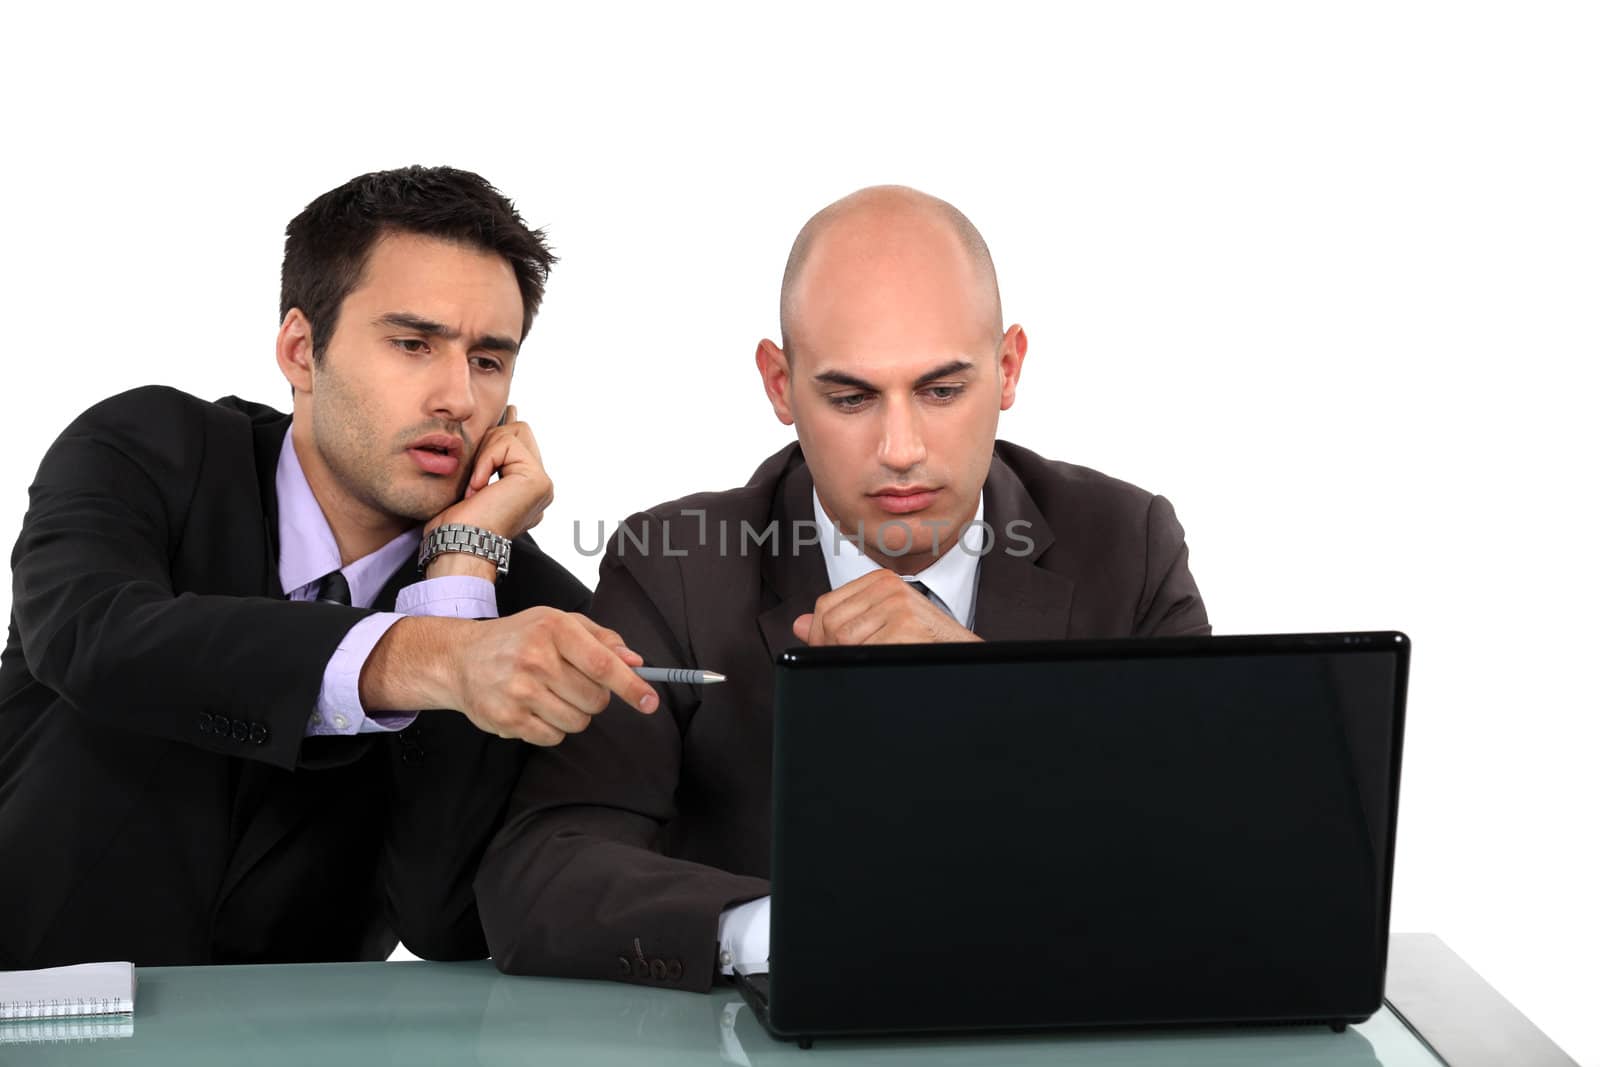 Executives discussing content on a laptop by phovoir